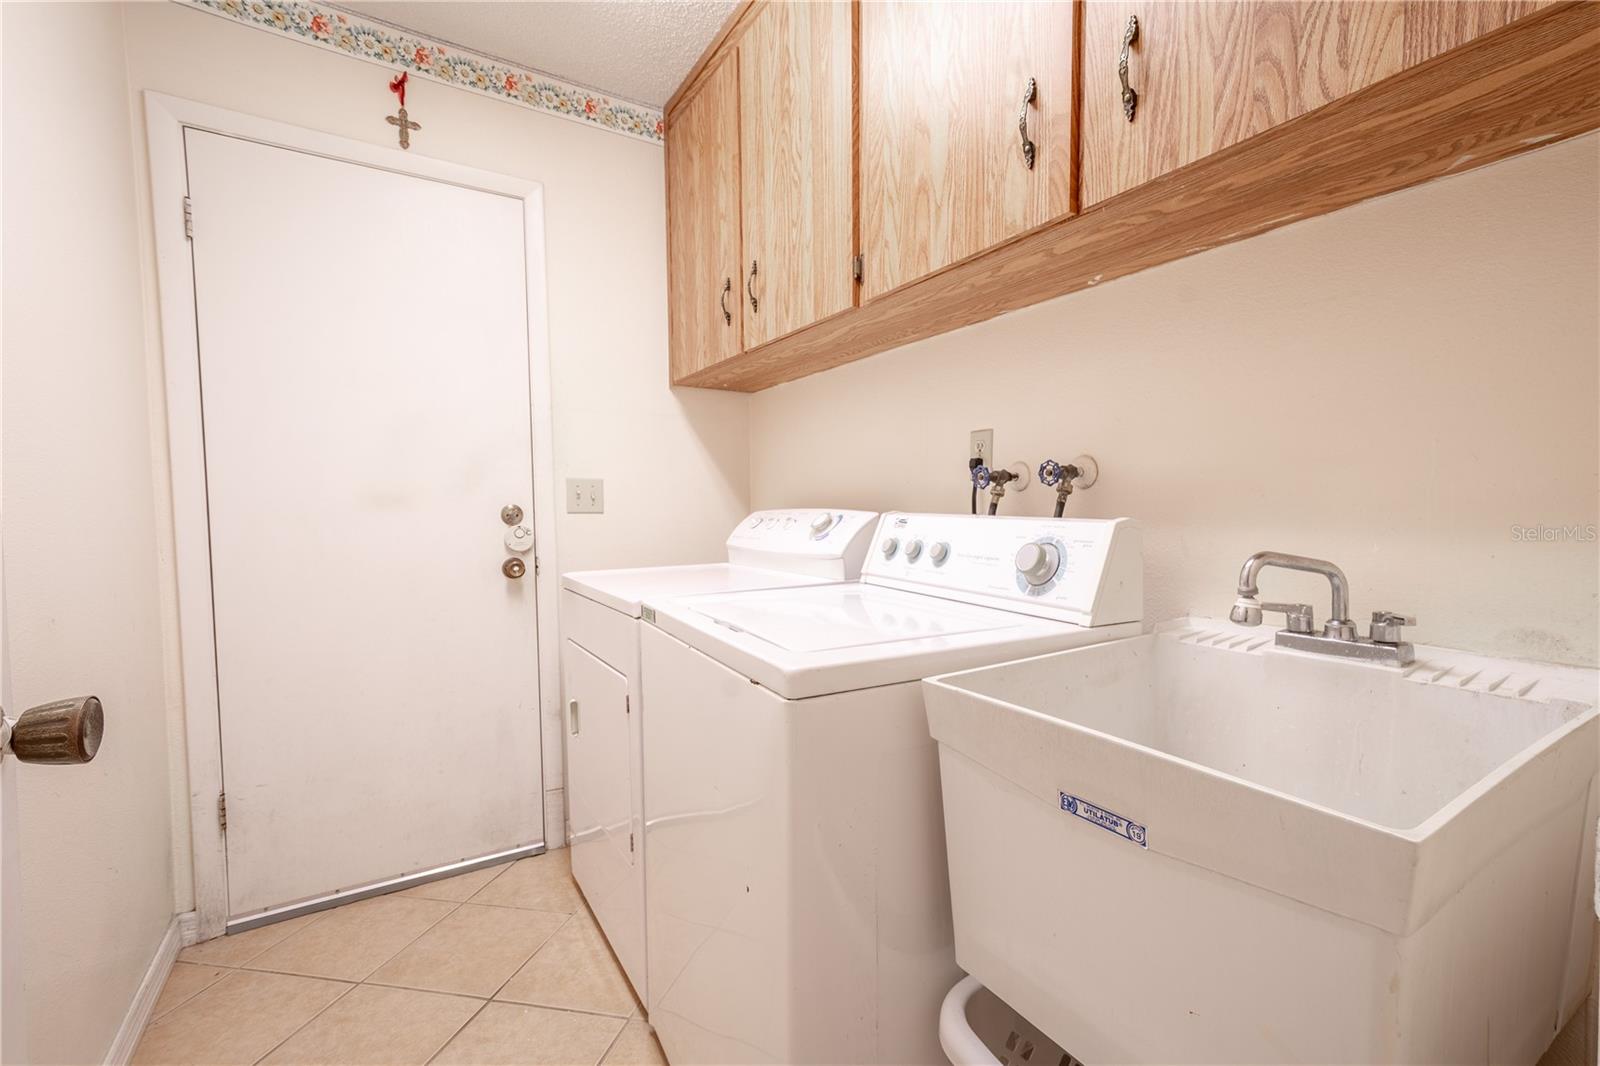 The laundry room features a washer and dryer, a utility sink, overhead storage cabinets and a door to access the garage.